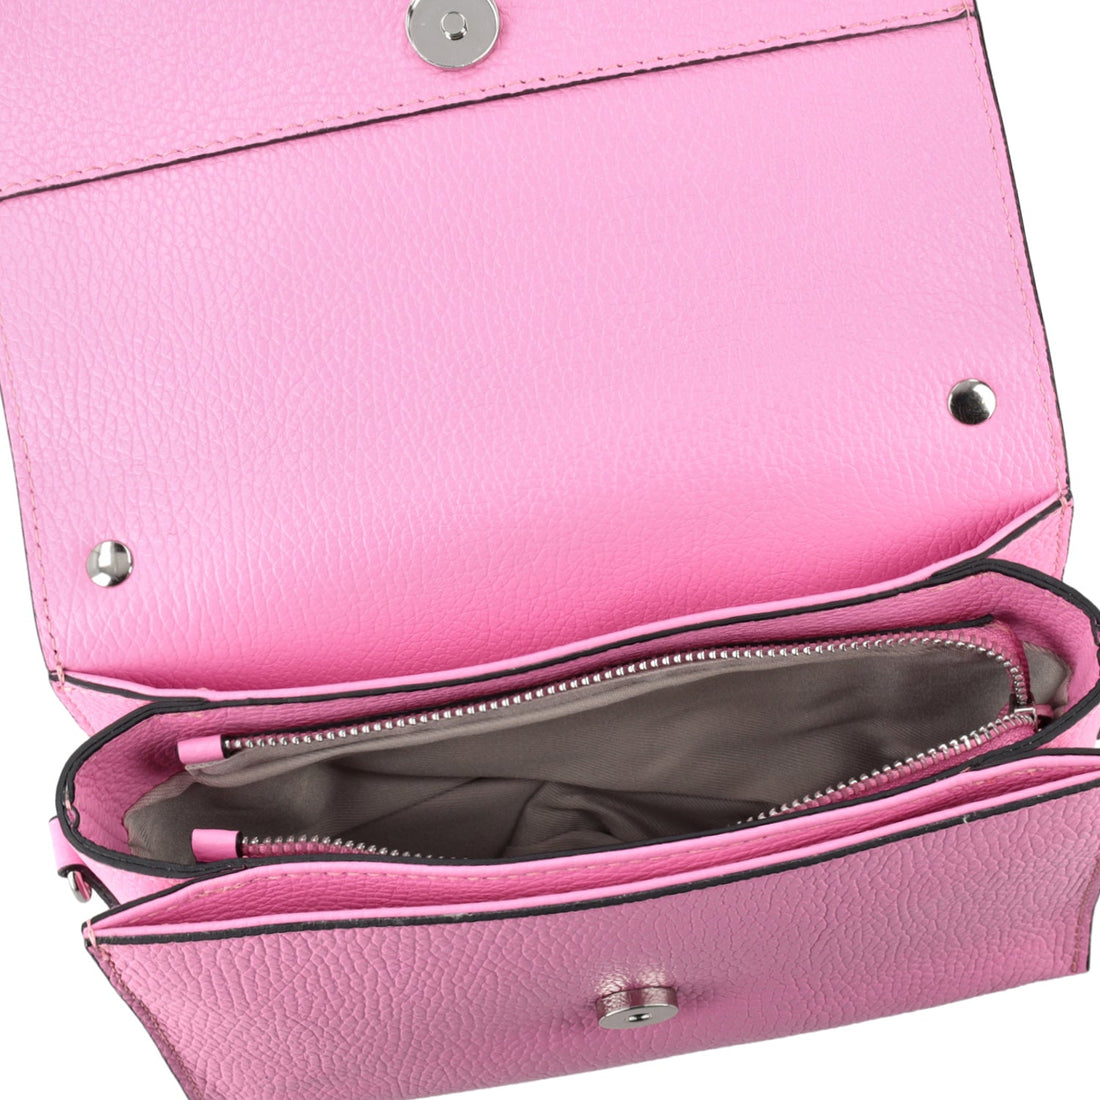 PINK NARCISO HAND BAG IN LEATHER WITH SHOULDER STRAP